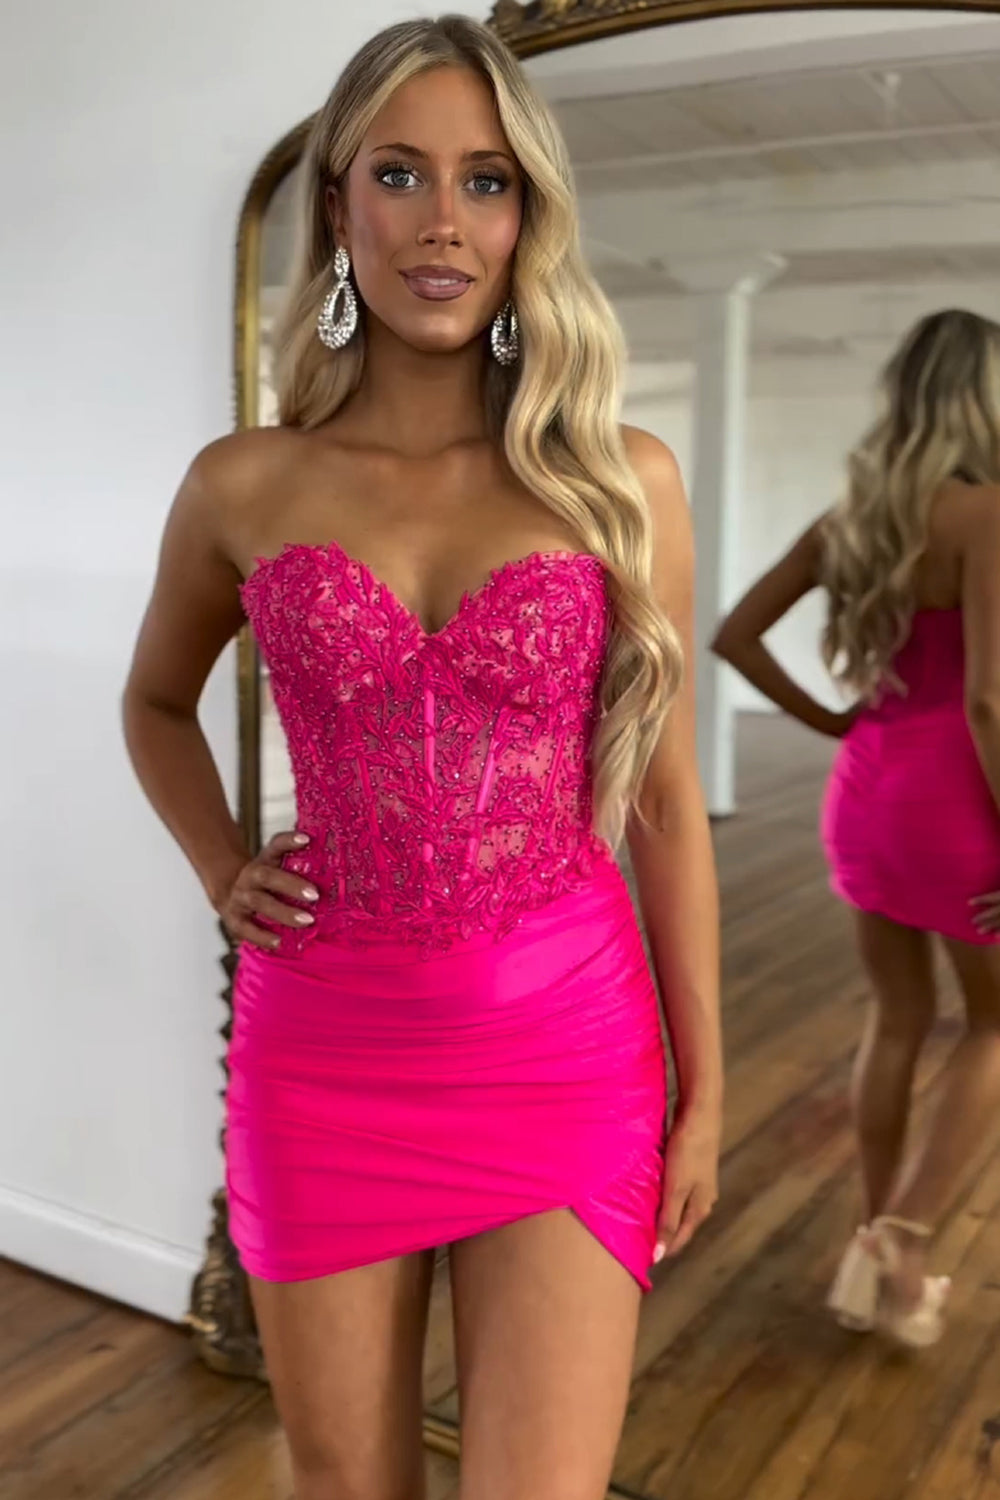 Fuchsia Strapless Lace Tight Homecoming Dress